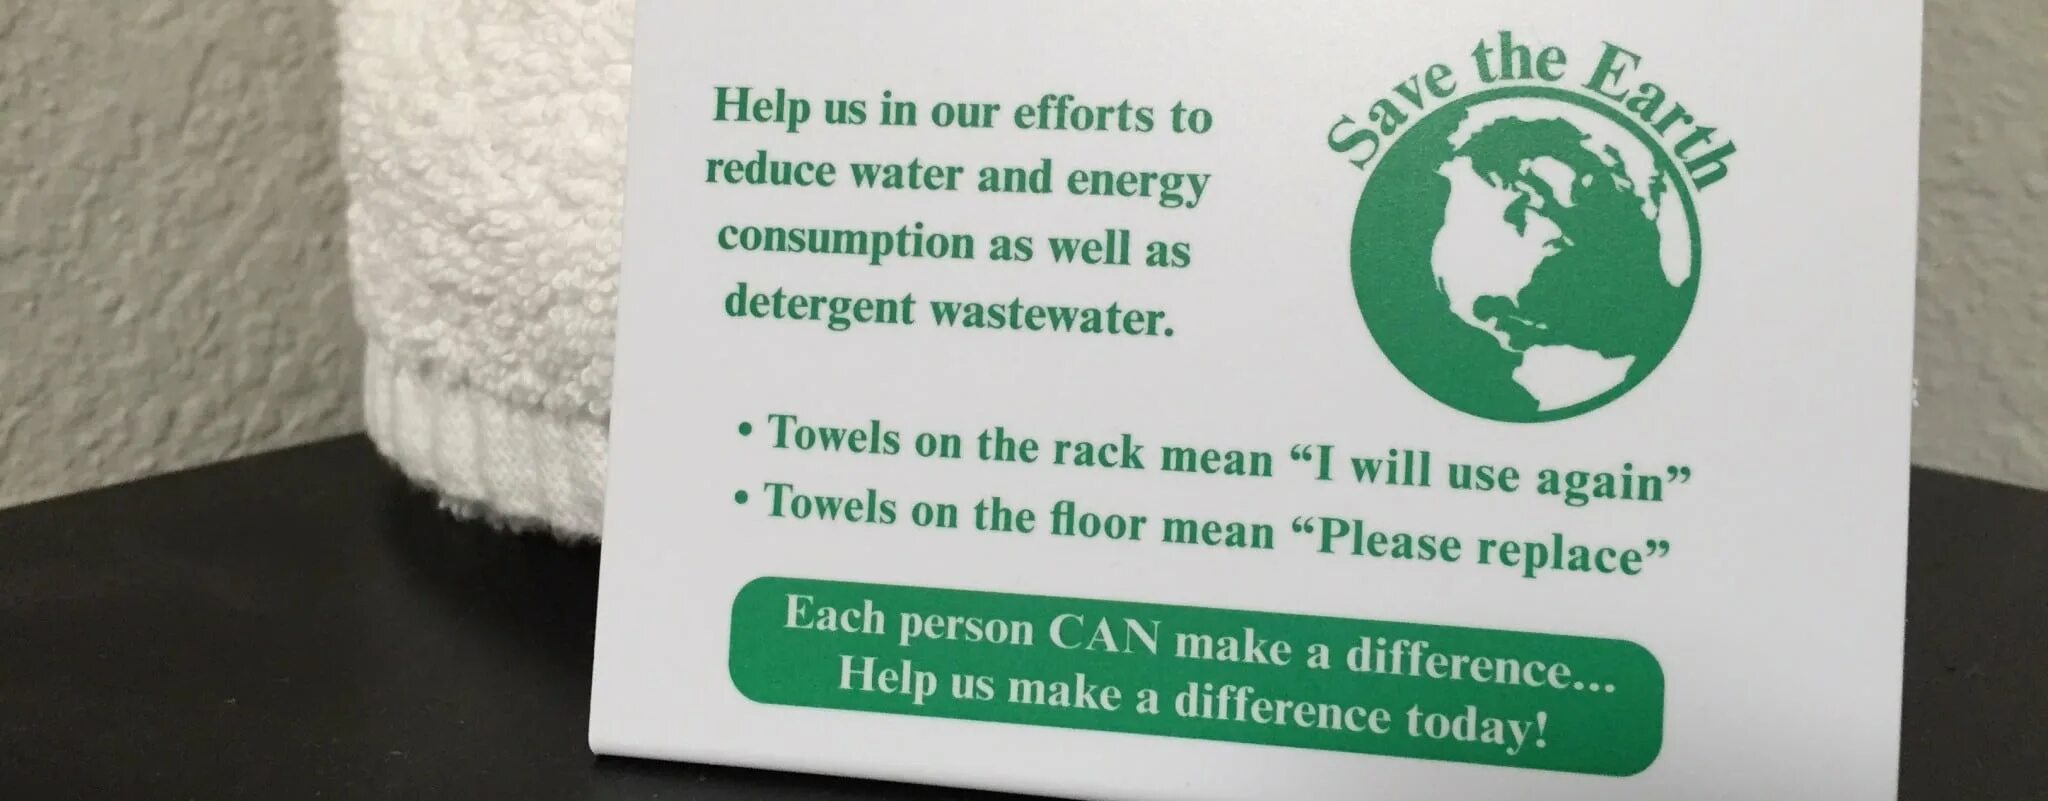 In order protect. Environment Card in the Hotel Towels. Towel Card. Reuse Towels Hotel. Reuse or replace Towel.